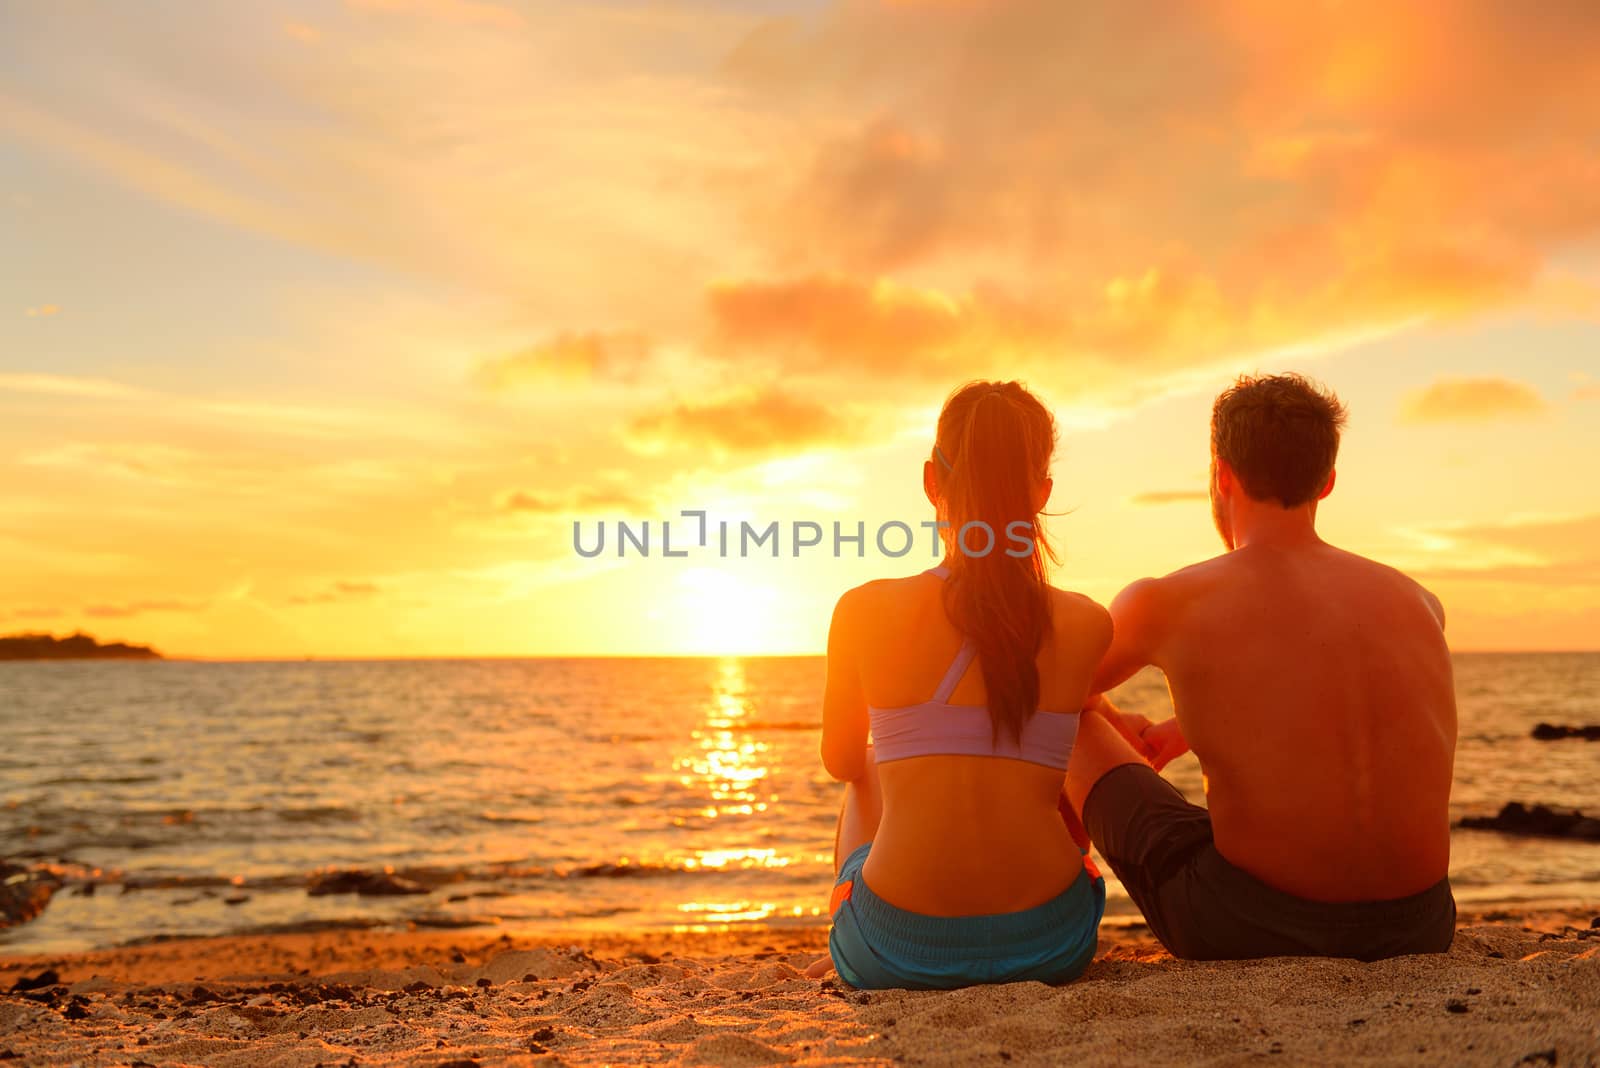 Happy Romantic Couple Enjoying Beautiful Sunset at the Beach Sitting in Sand looking at ocean sea and colorful yellow sky.